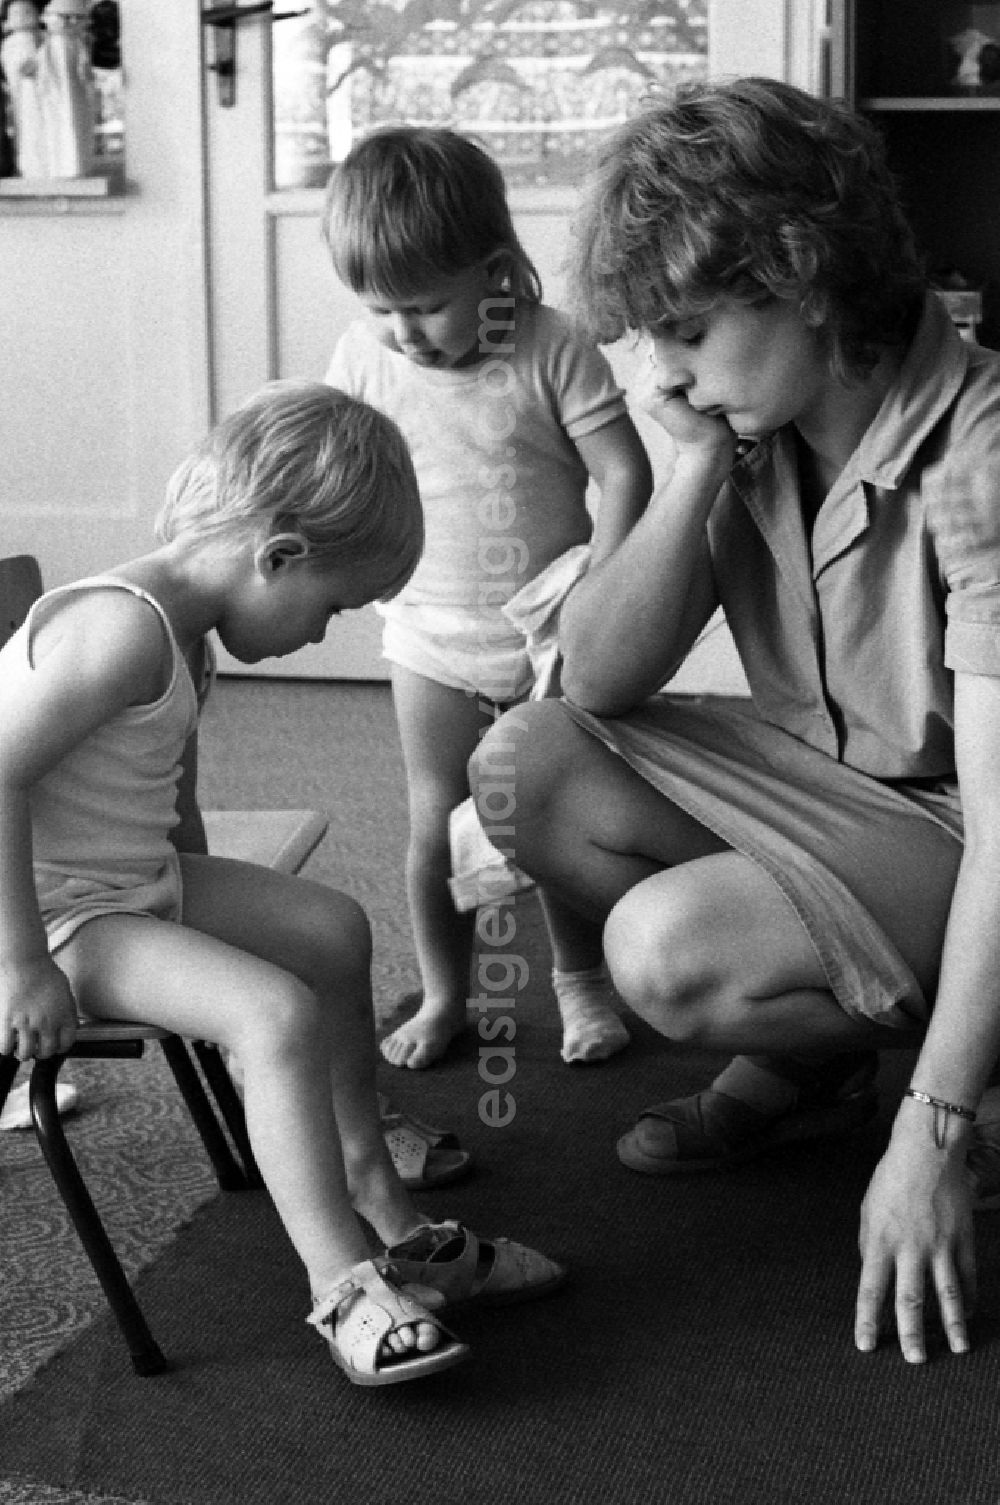 GDR photo archive: Berlin - Preparing for a nap in the kindergarten in Berlin Eastberlin on the territory of the former GDR, German Democratic Republic. Educator watching a toddler trying to undress on her own